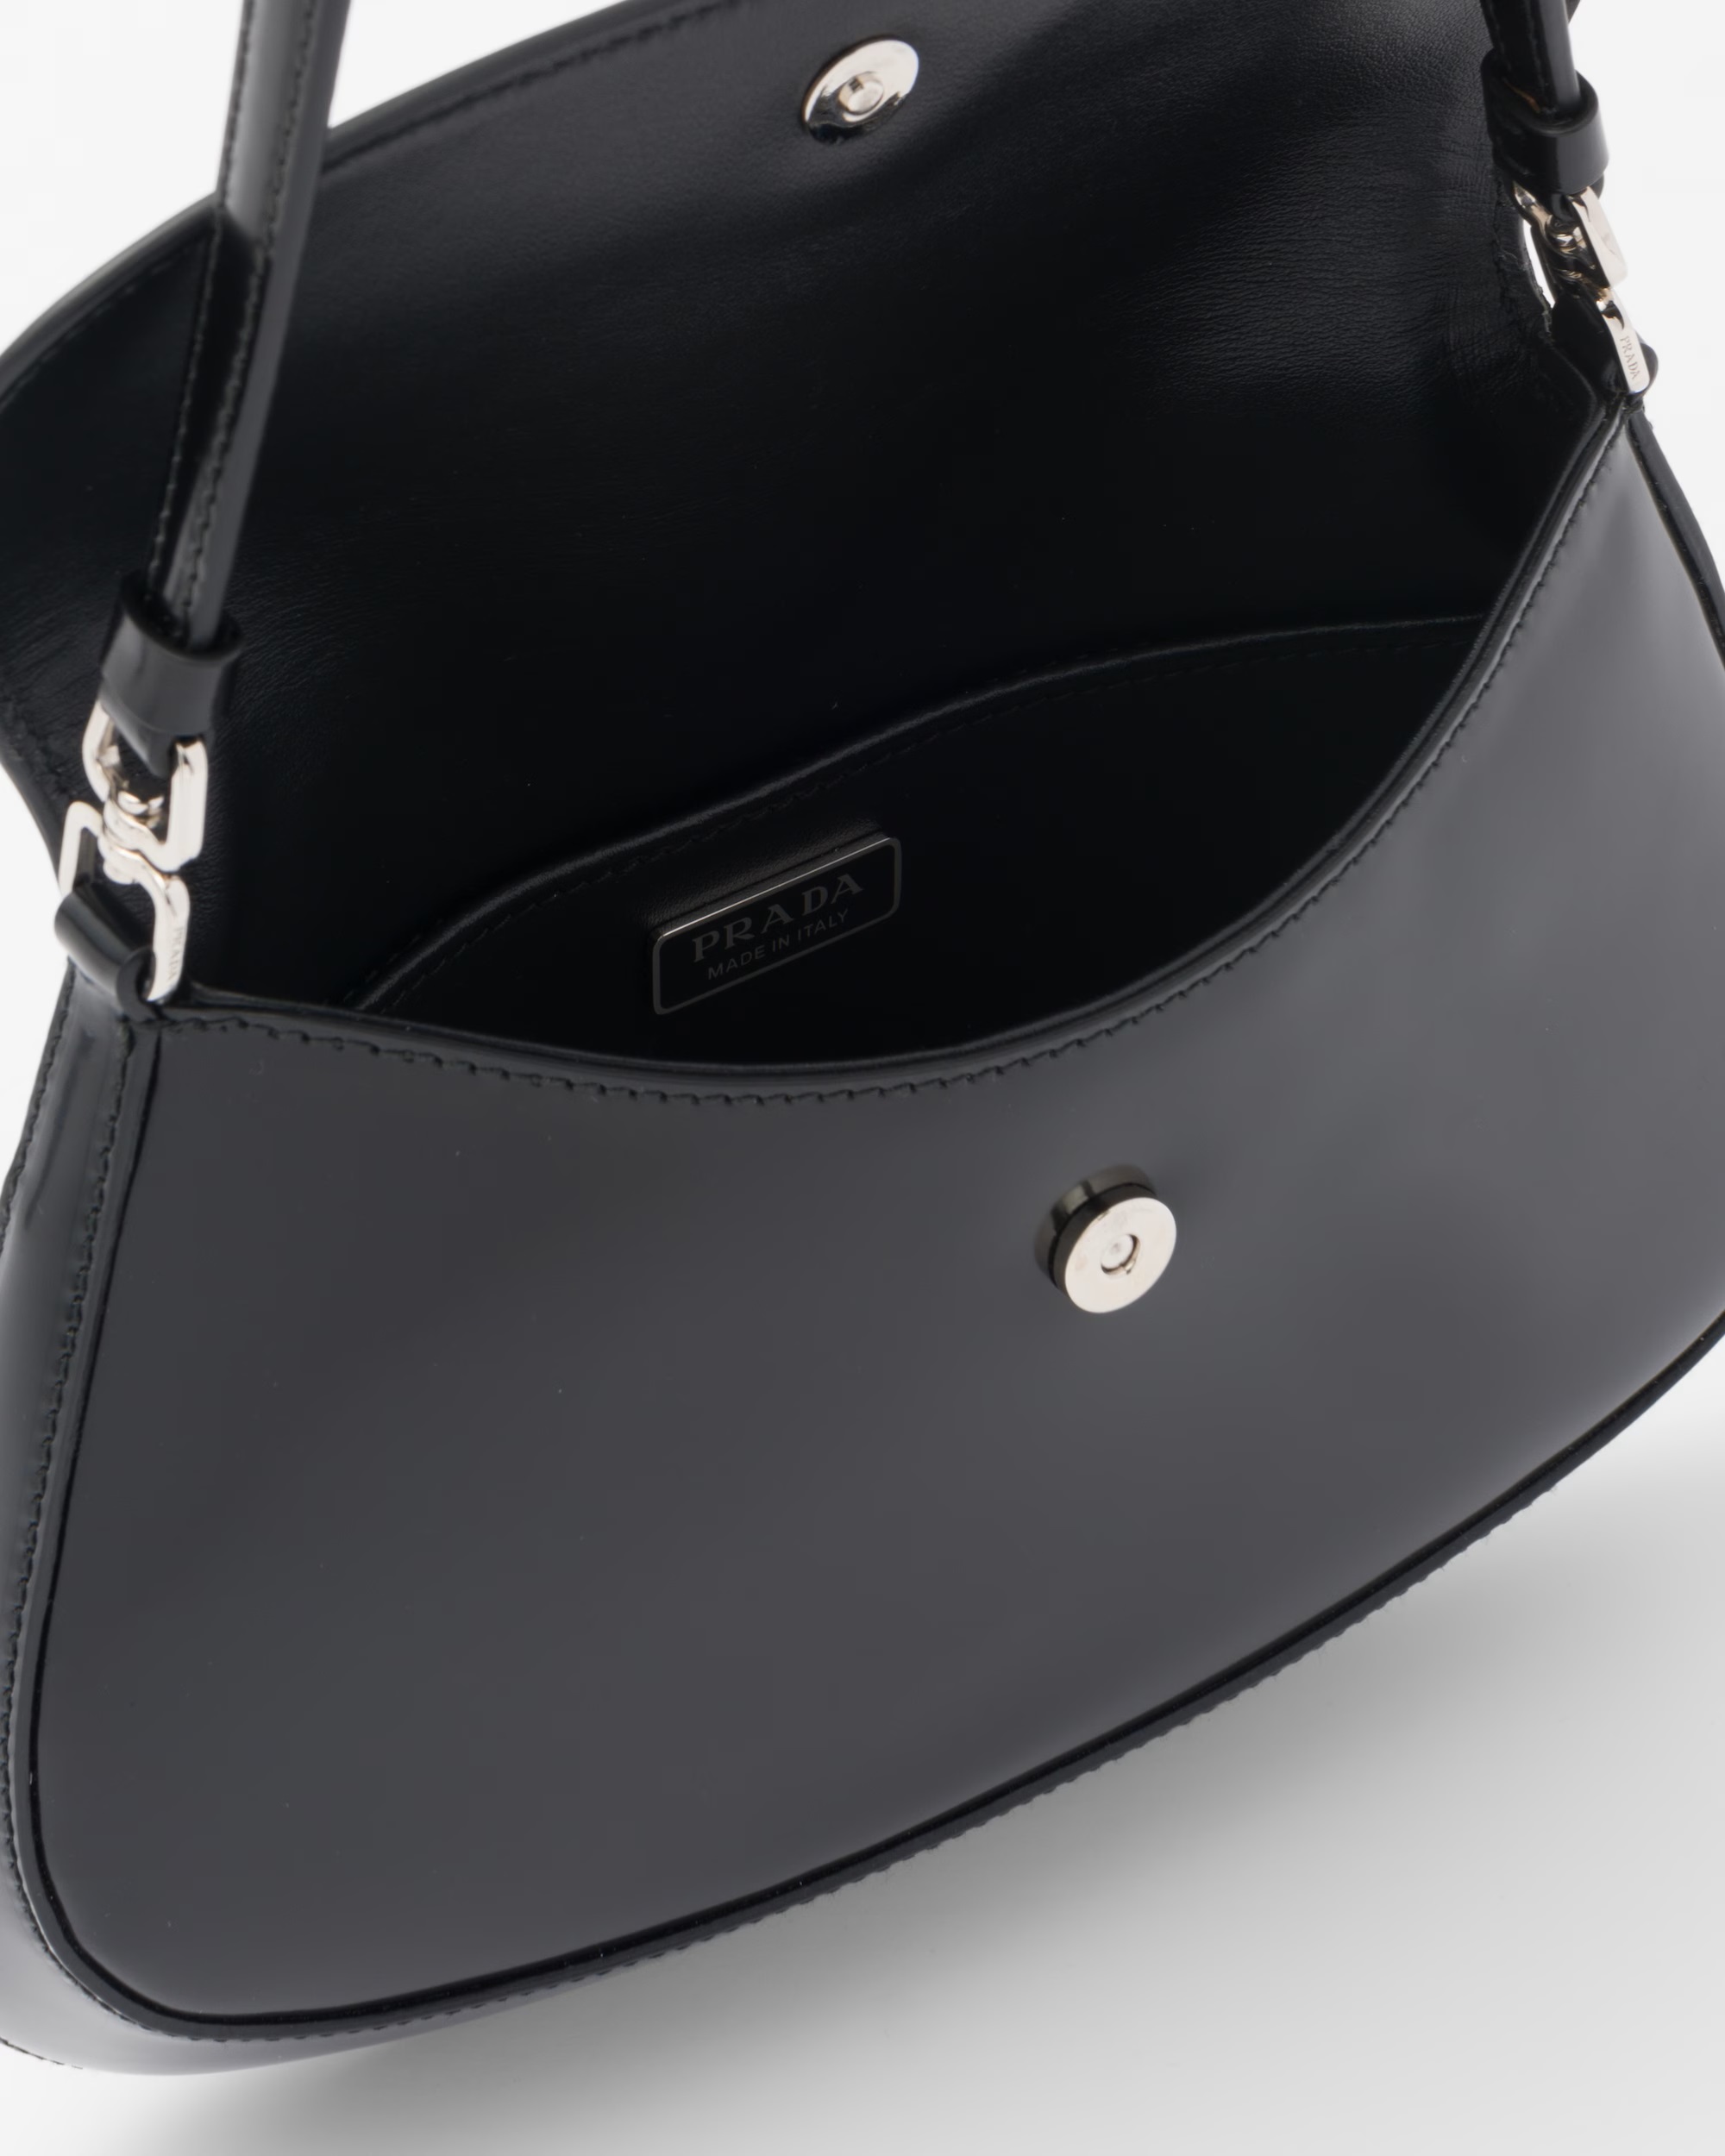 TÚI XÁCH PRADA CLEO BRUSHED LEATHER SHOULDER BAG WITH FLAP 18